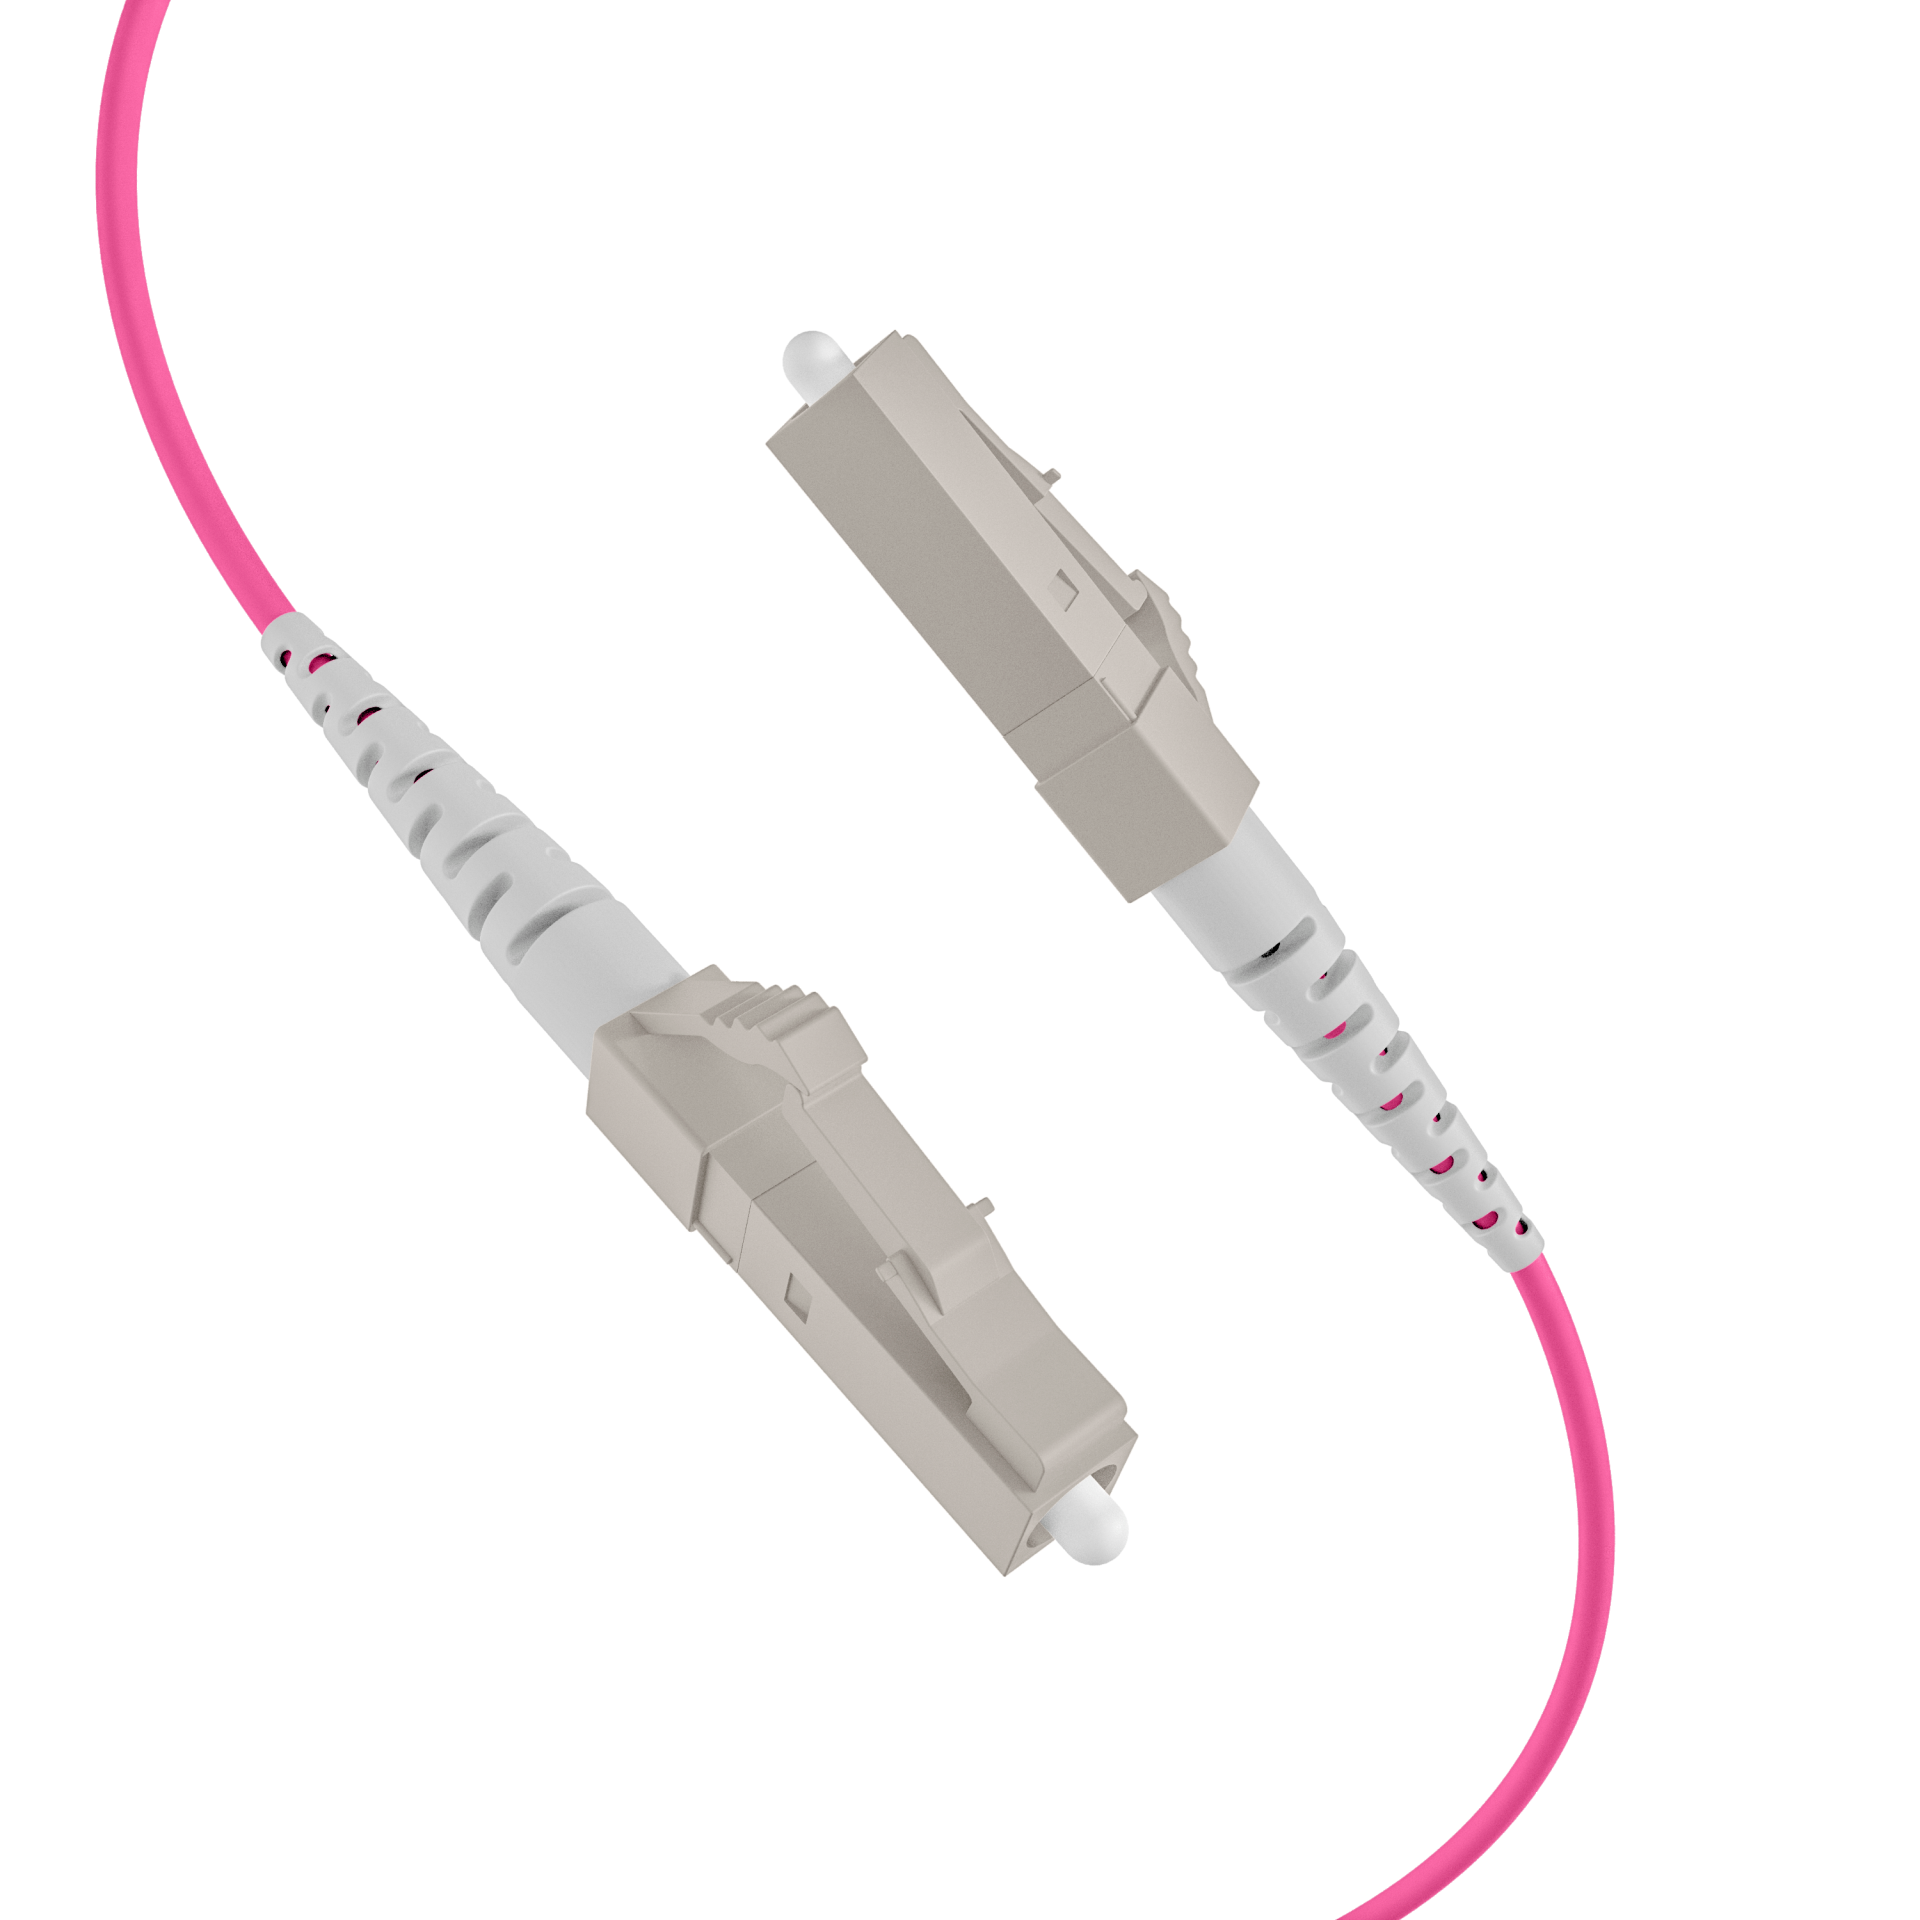 Trunkcable U-DQ(ZN)BH OM4 8G (1x8) LC-LC,190m Dca LSZH